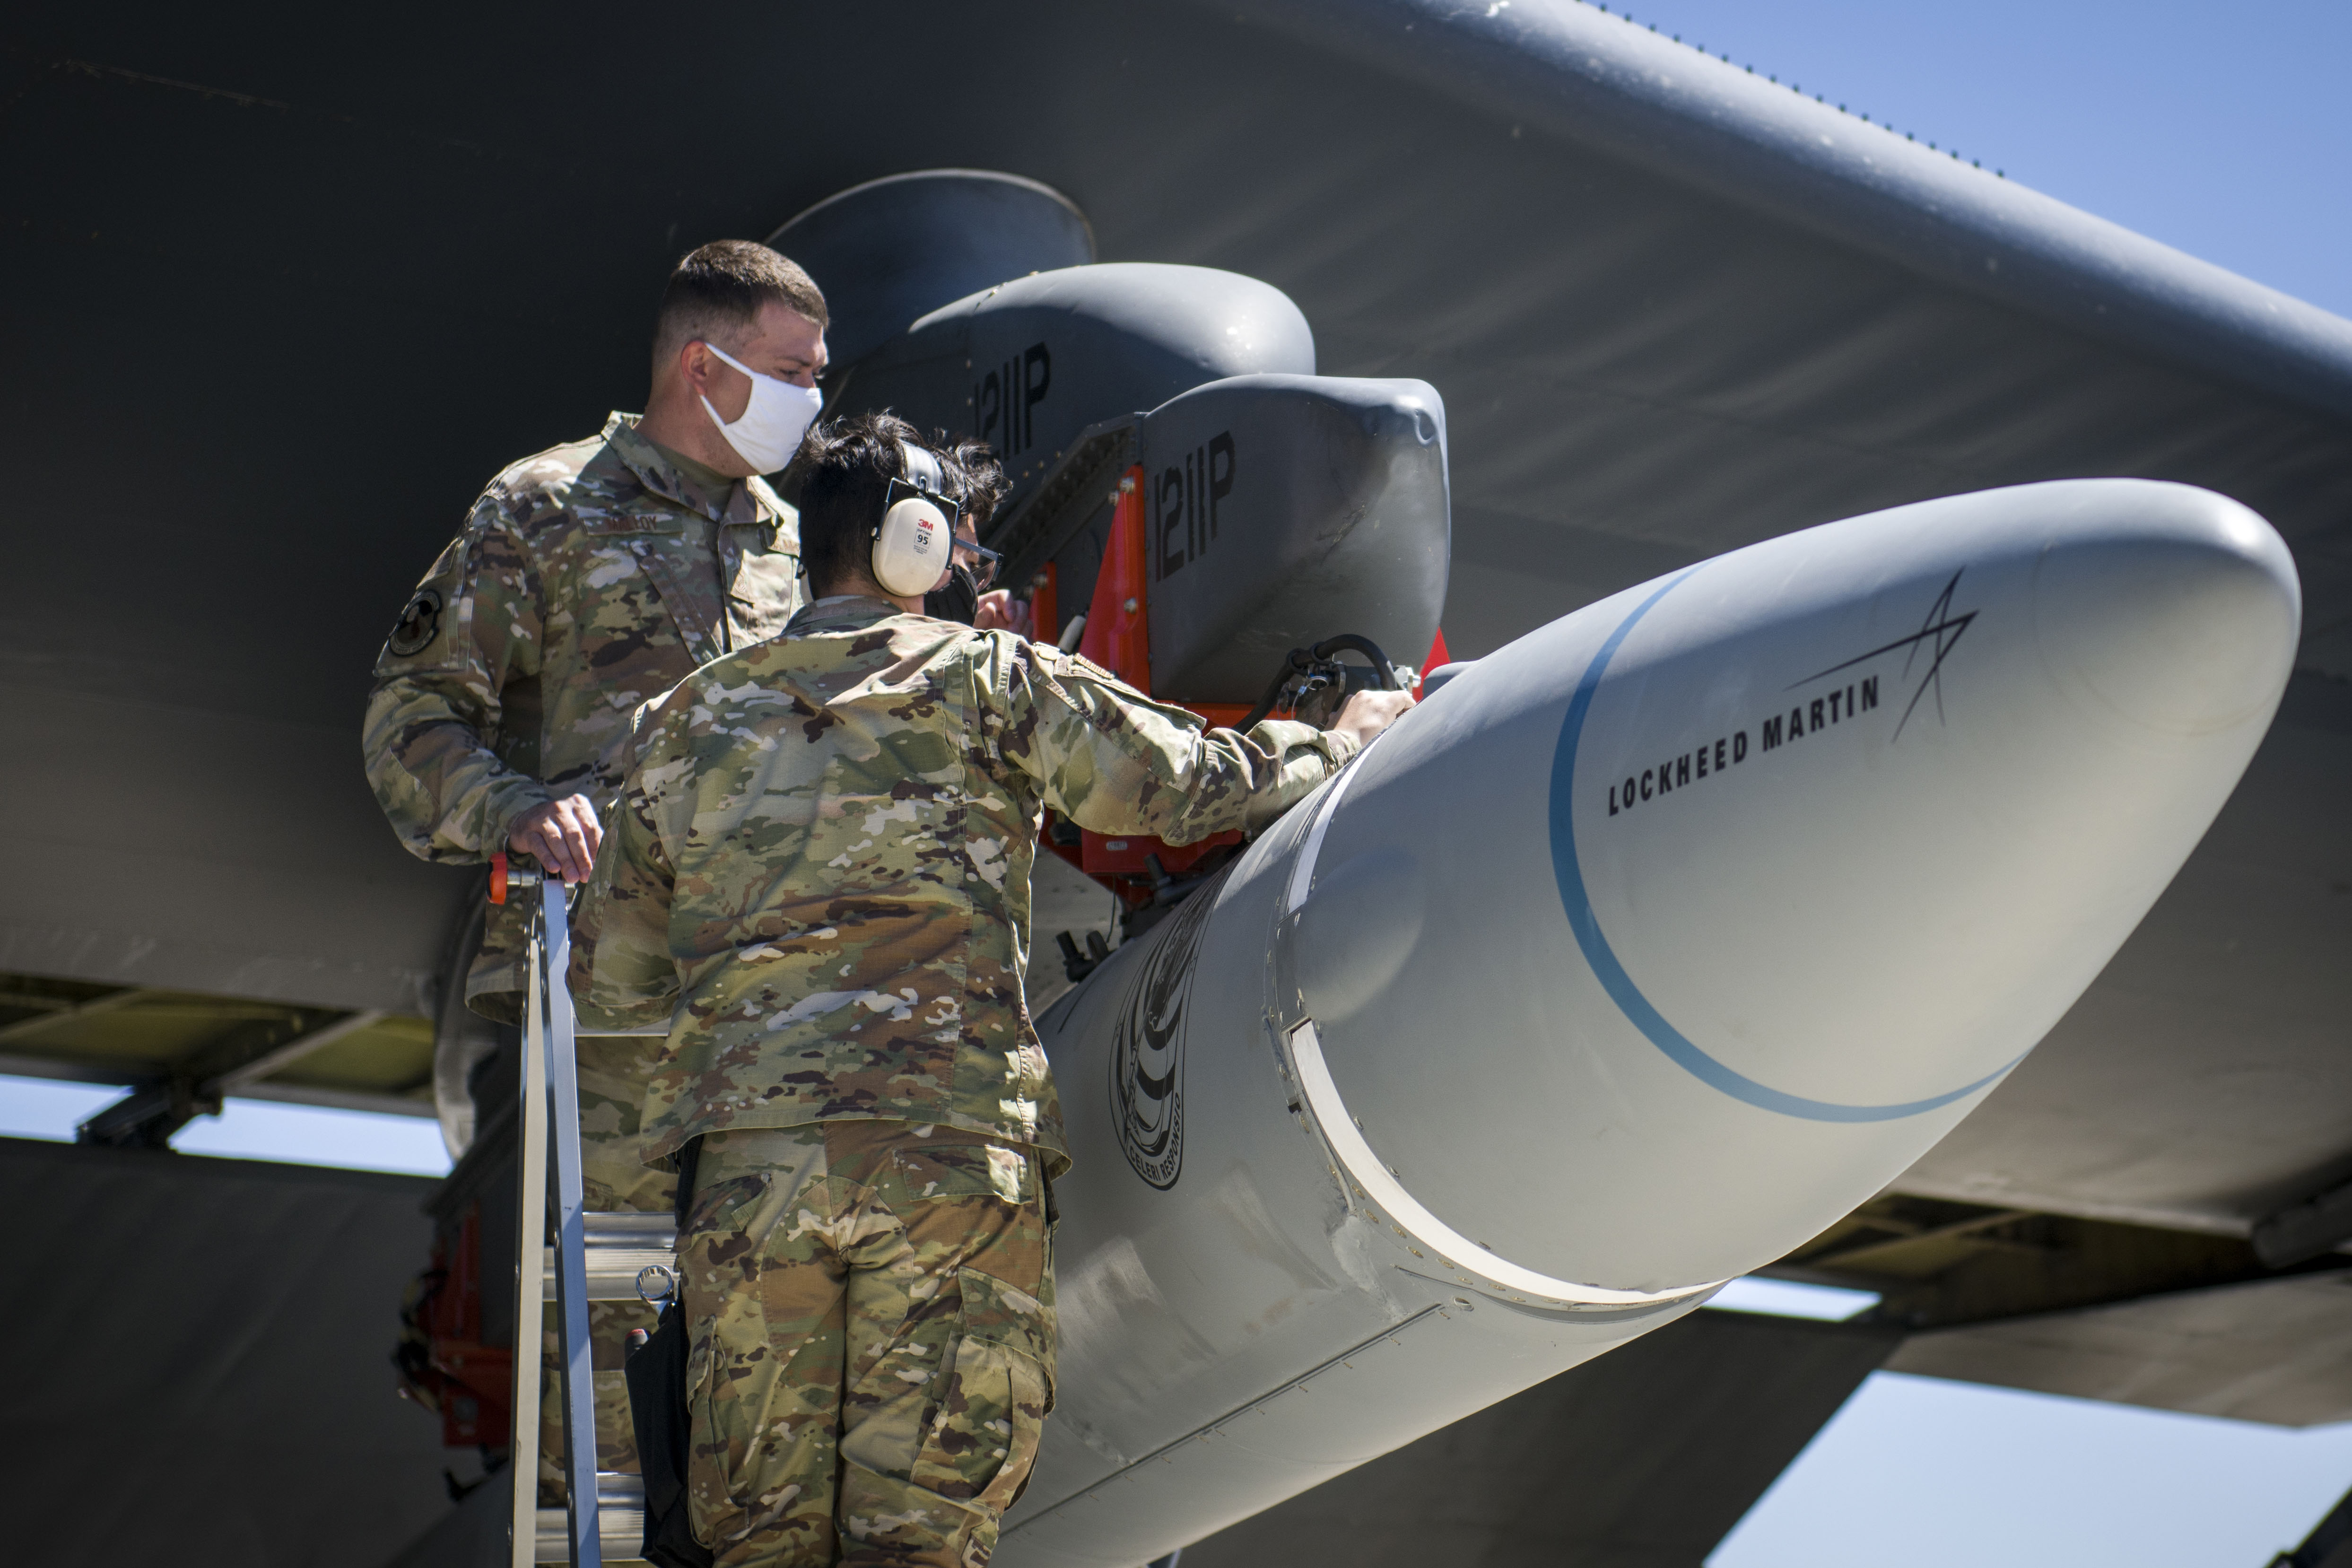 Airmen from the 912th Aircraft Maintenance Squadron secure the AGM-183A Air Launched Rapid Response Weapon Instrumented Measurement Vehicle 2 as it is loaded under the wing of a B-52H Stratofortress during a test hypersonic, Edwards Air Force Base, Calif., Aug. 28, 2019. 6, 2020.